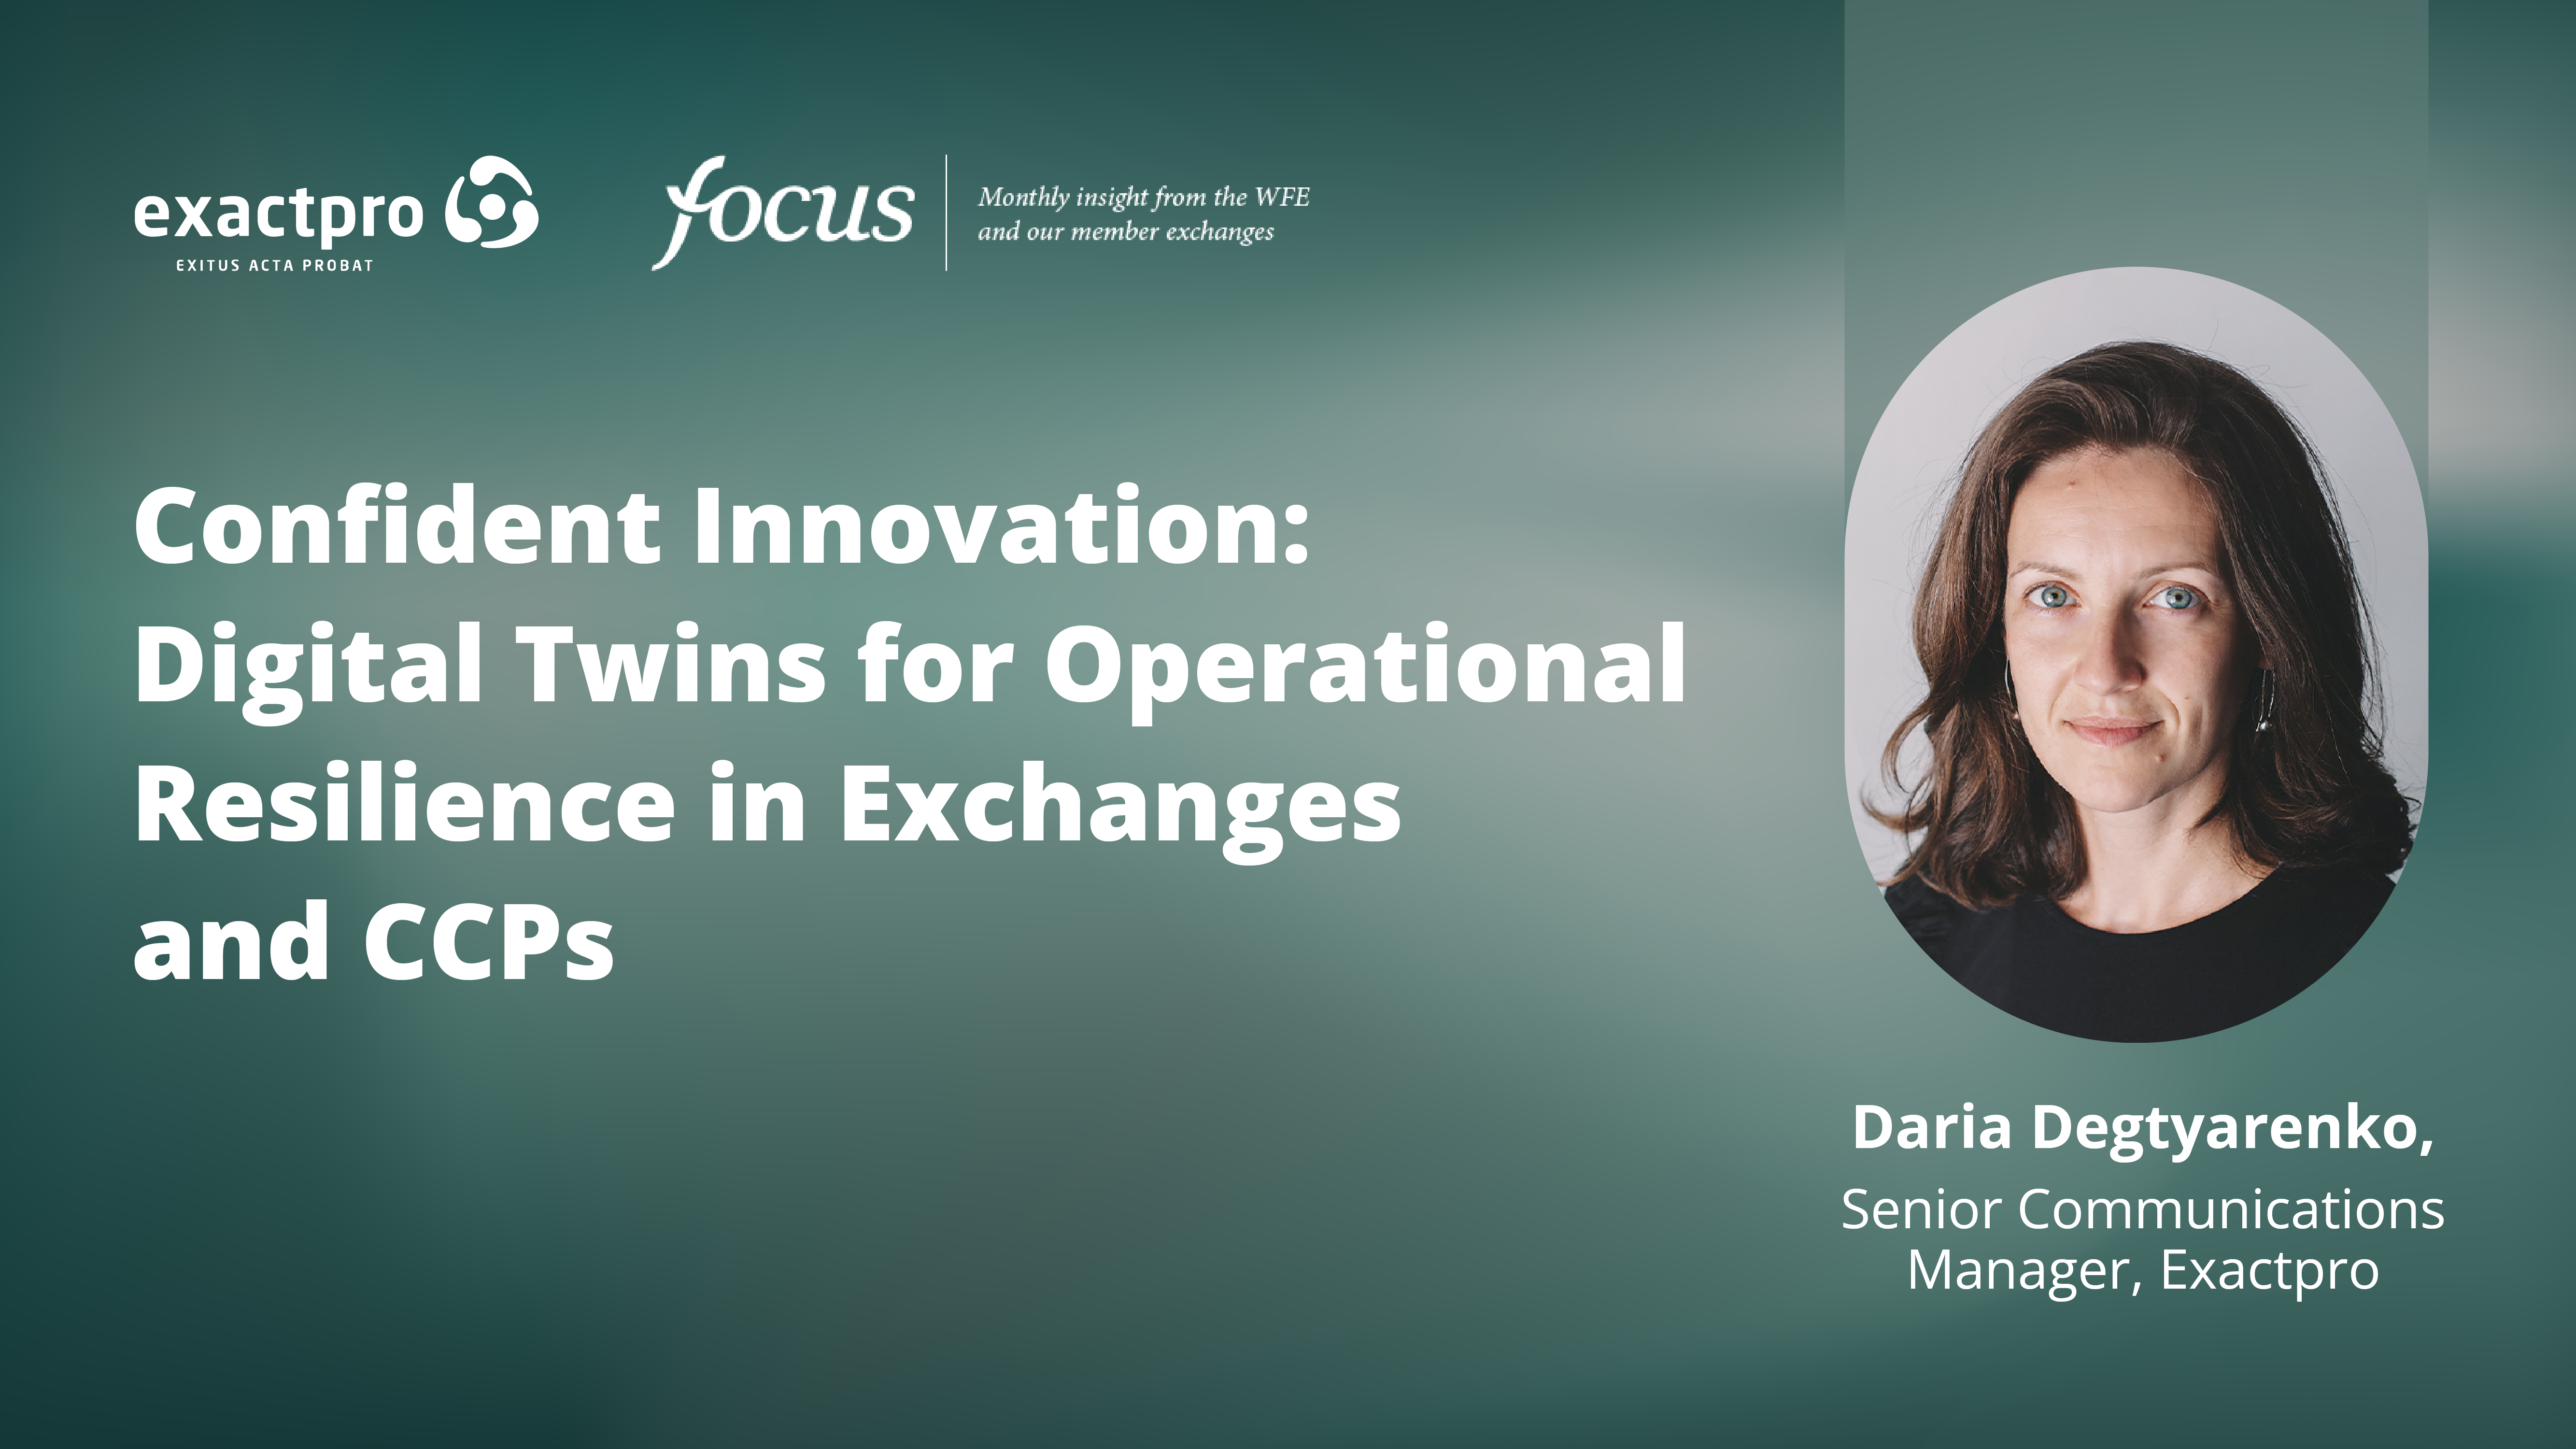 Confident Innovation: Digital Twins for Operational Resilience in Exchanges and CCPs